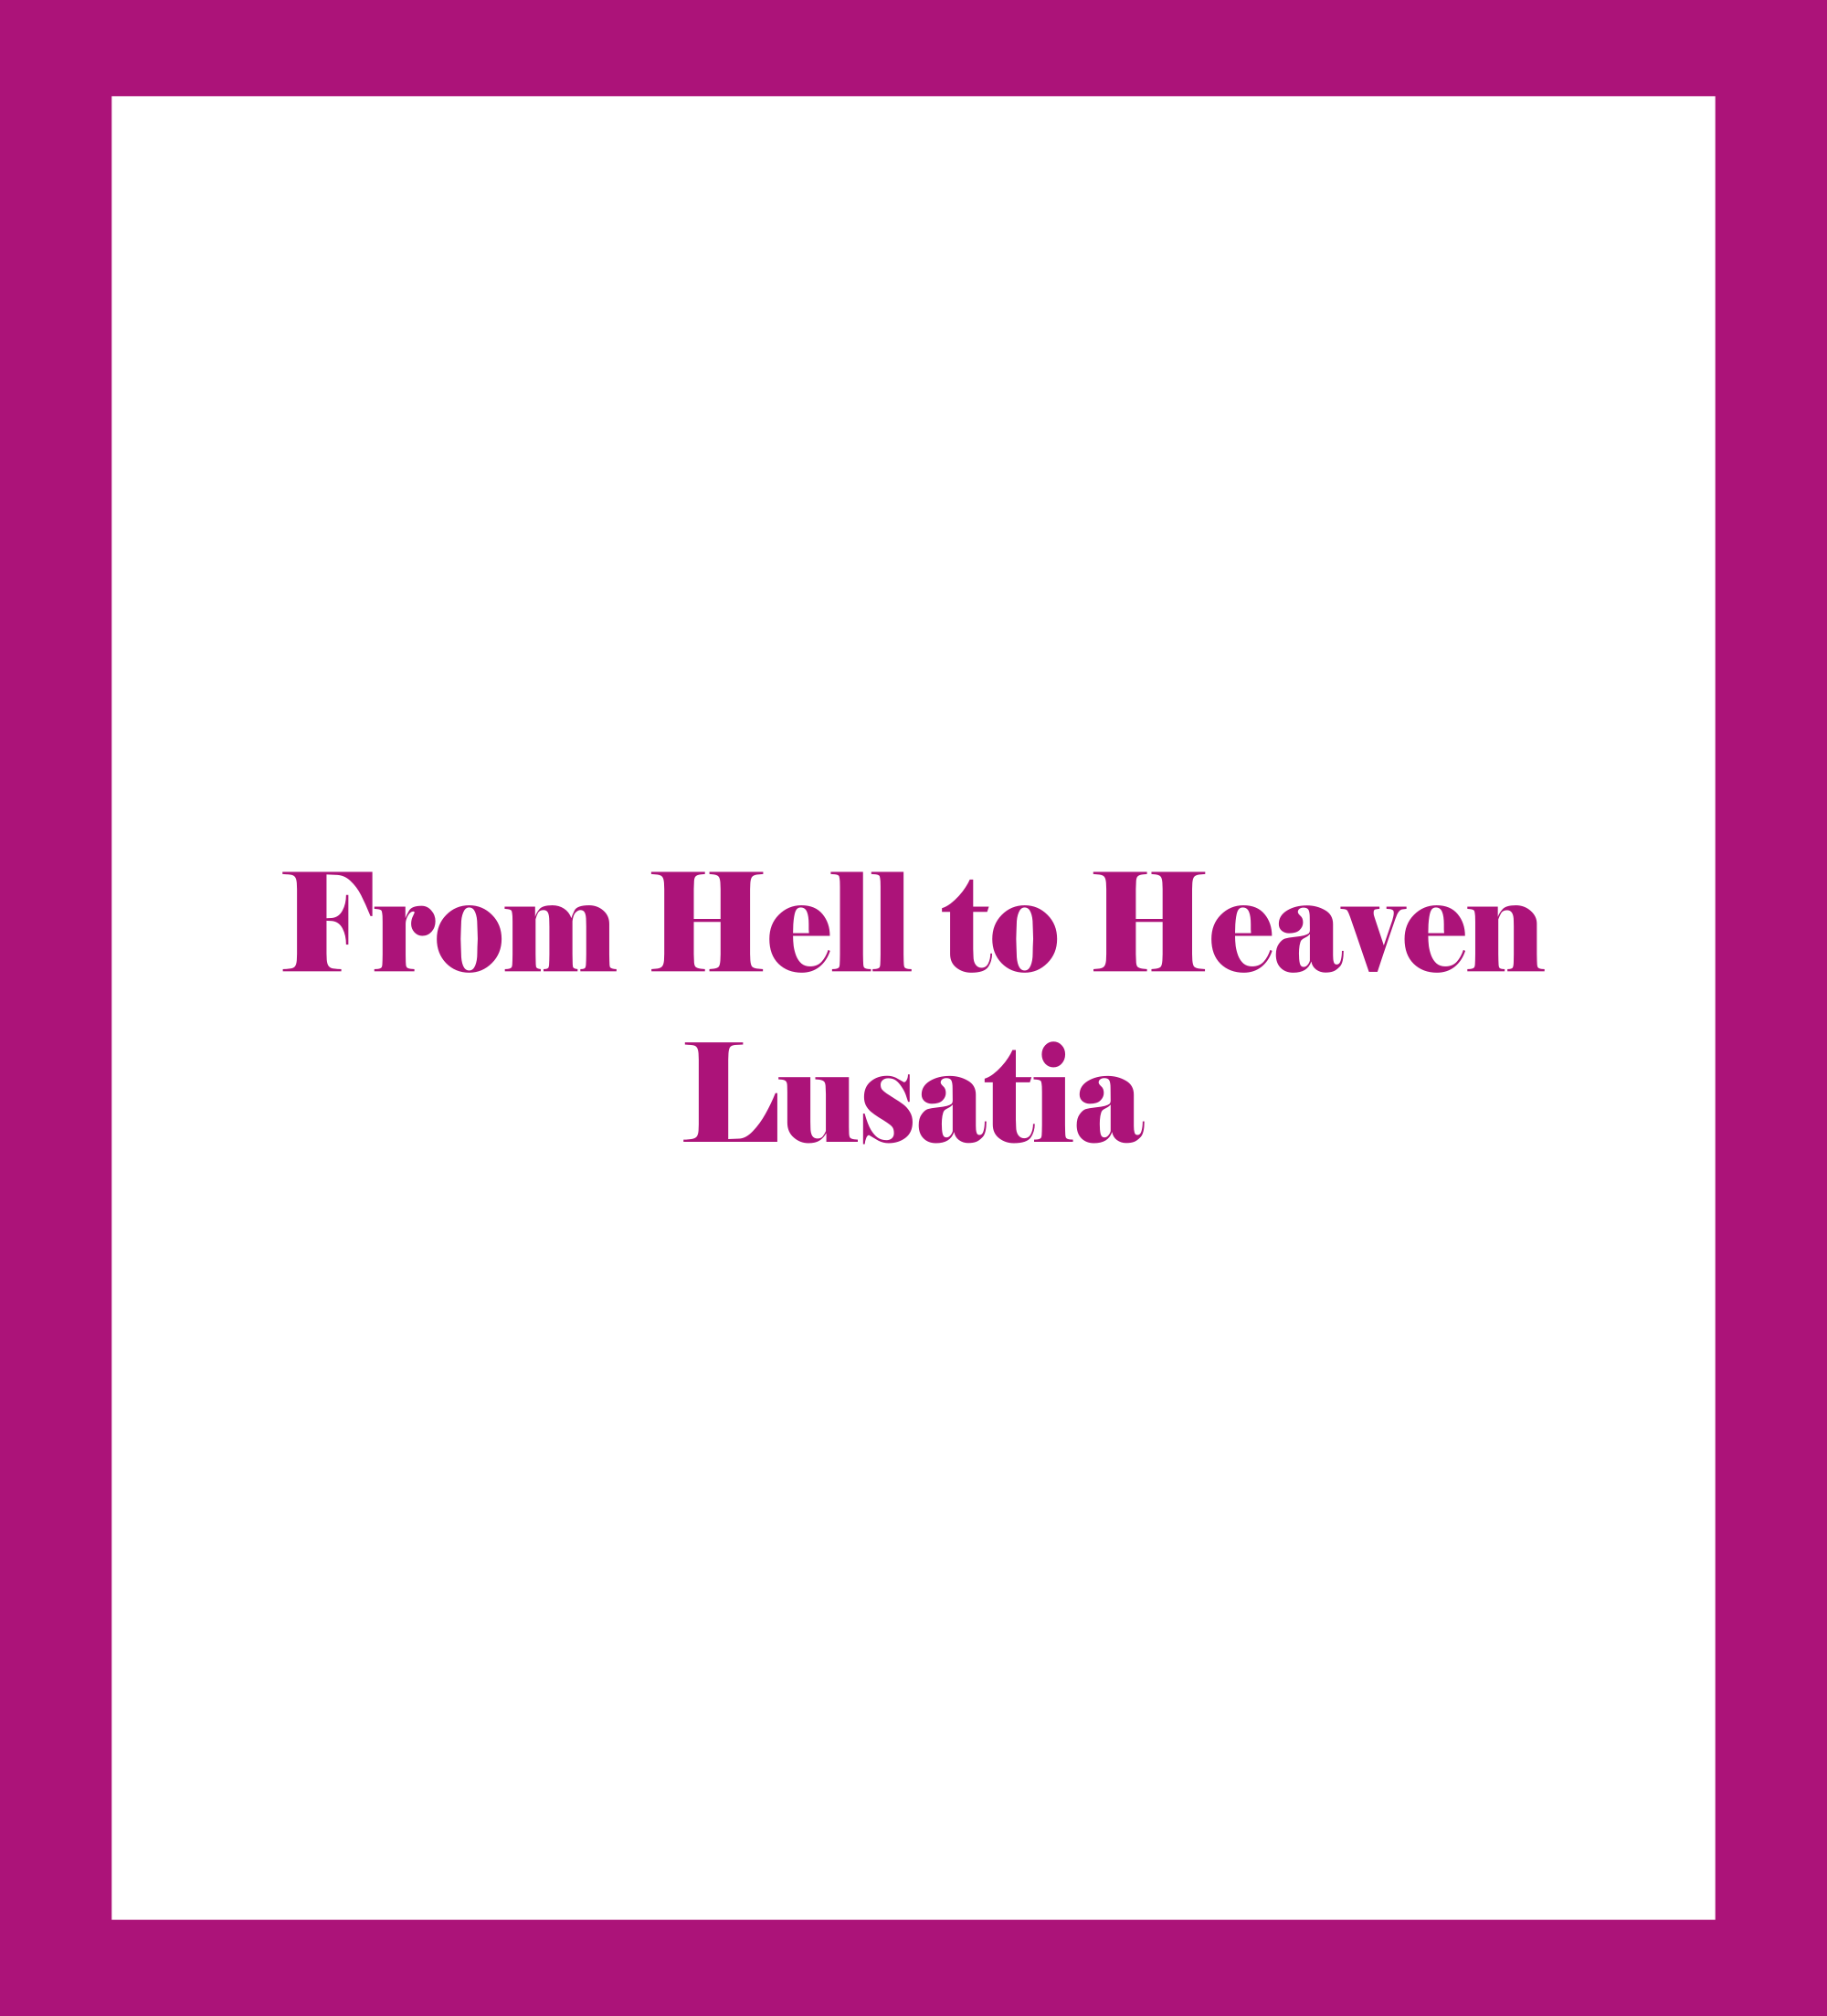 From Hell to Heaven - Lusatia